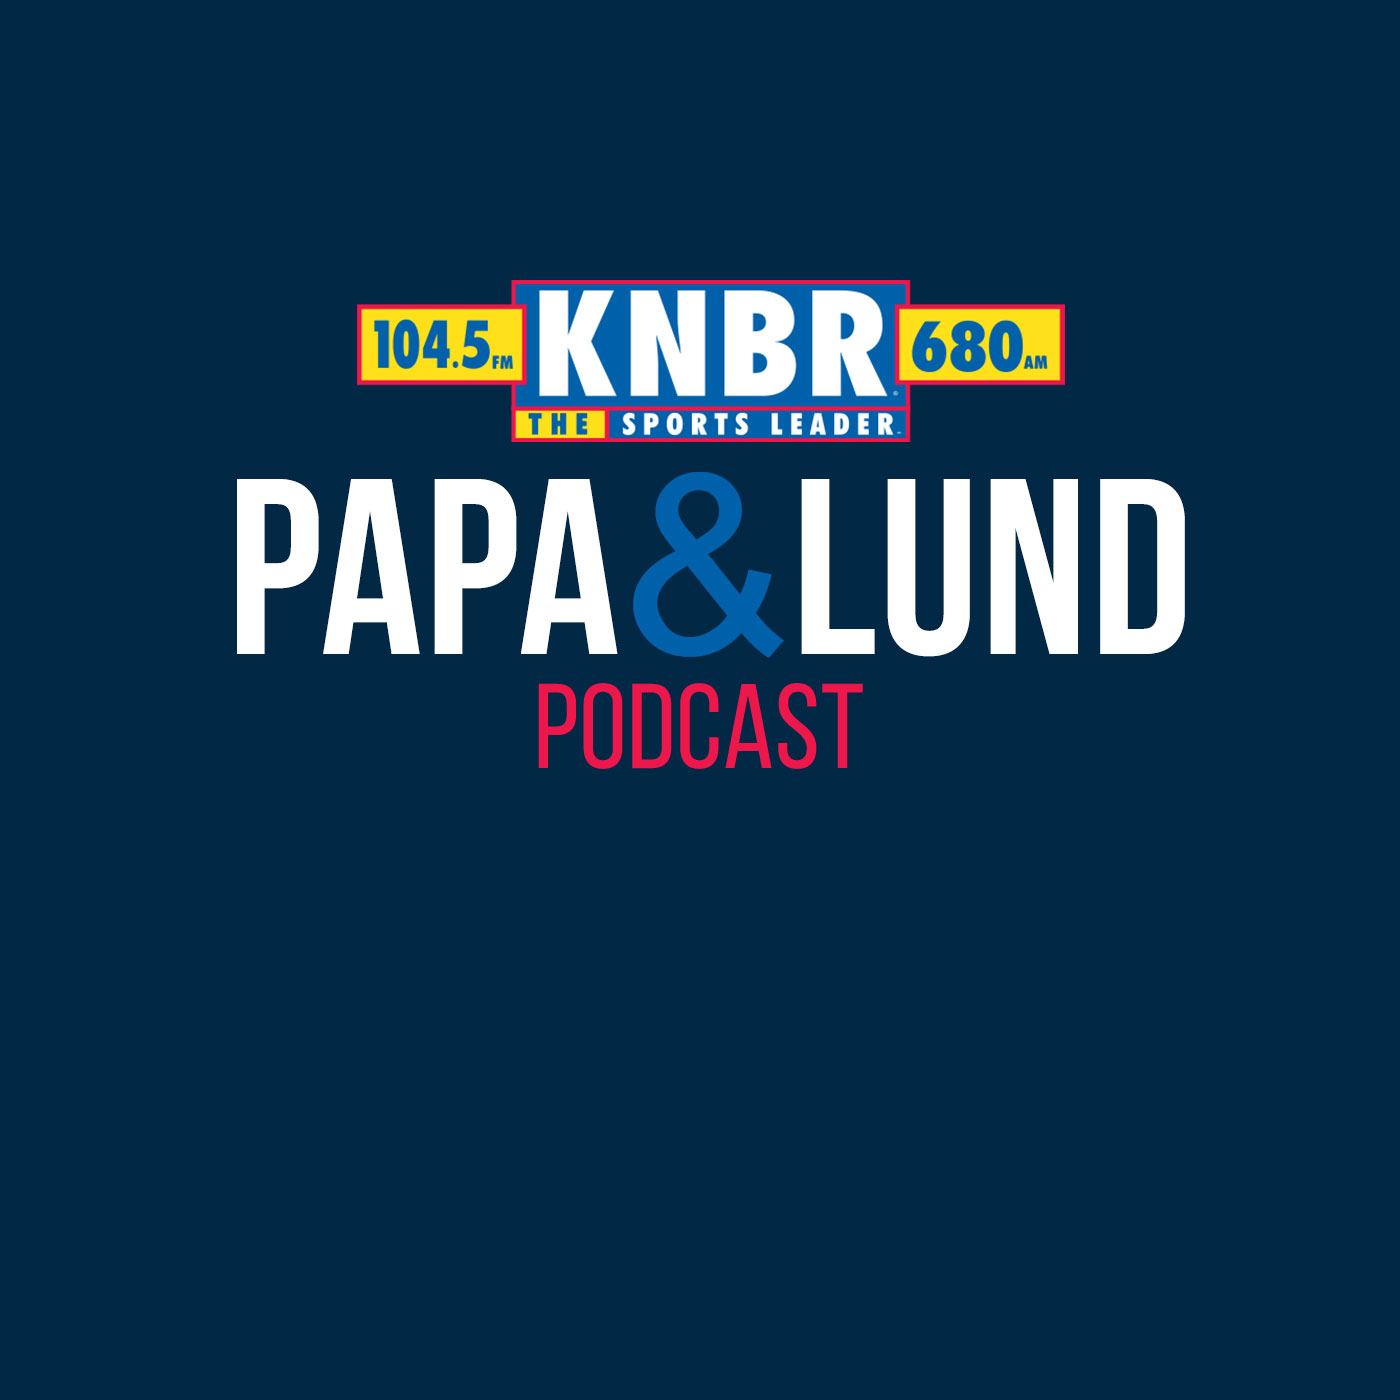 10-6 Jon Machota joins Papa & Lund to preview how the Sunday Night game will be decided in the battle between the trenches with both the 49ers & Cowboys trying to prove who is the top defense in the NFL